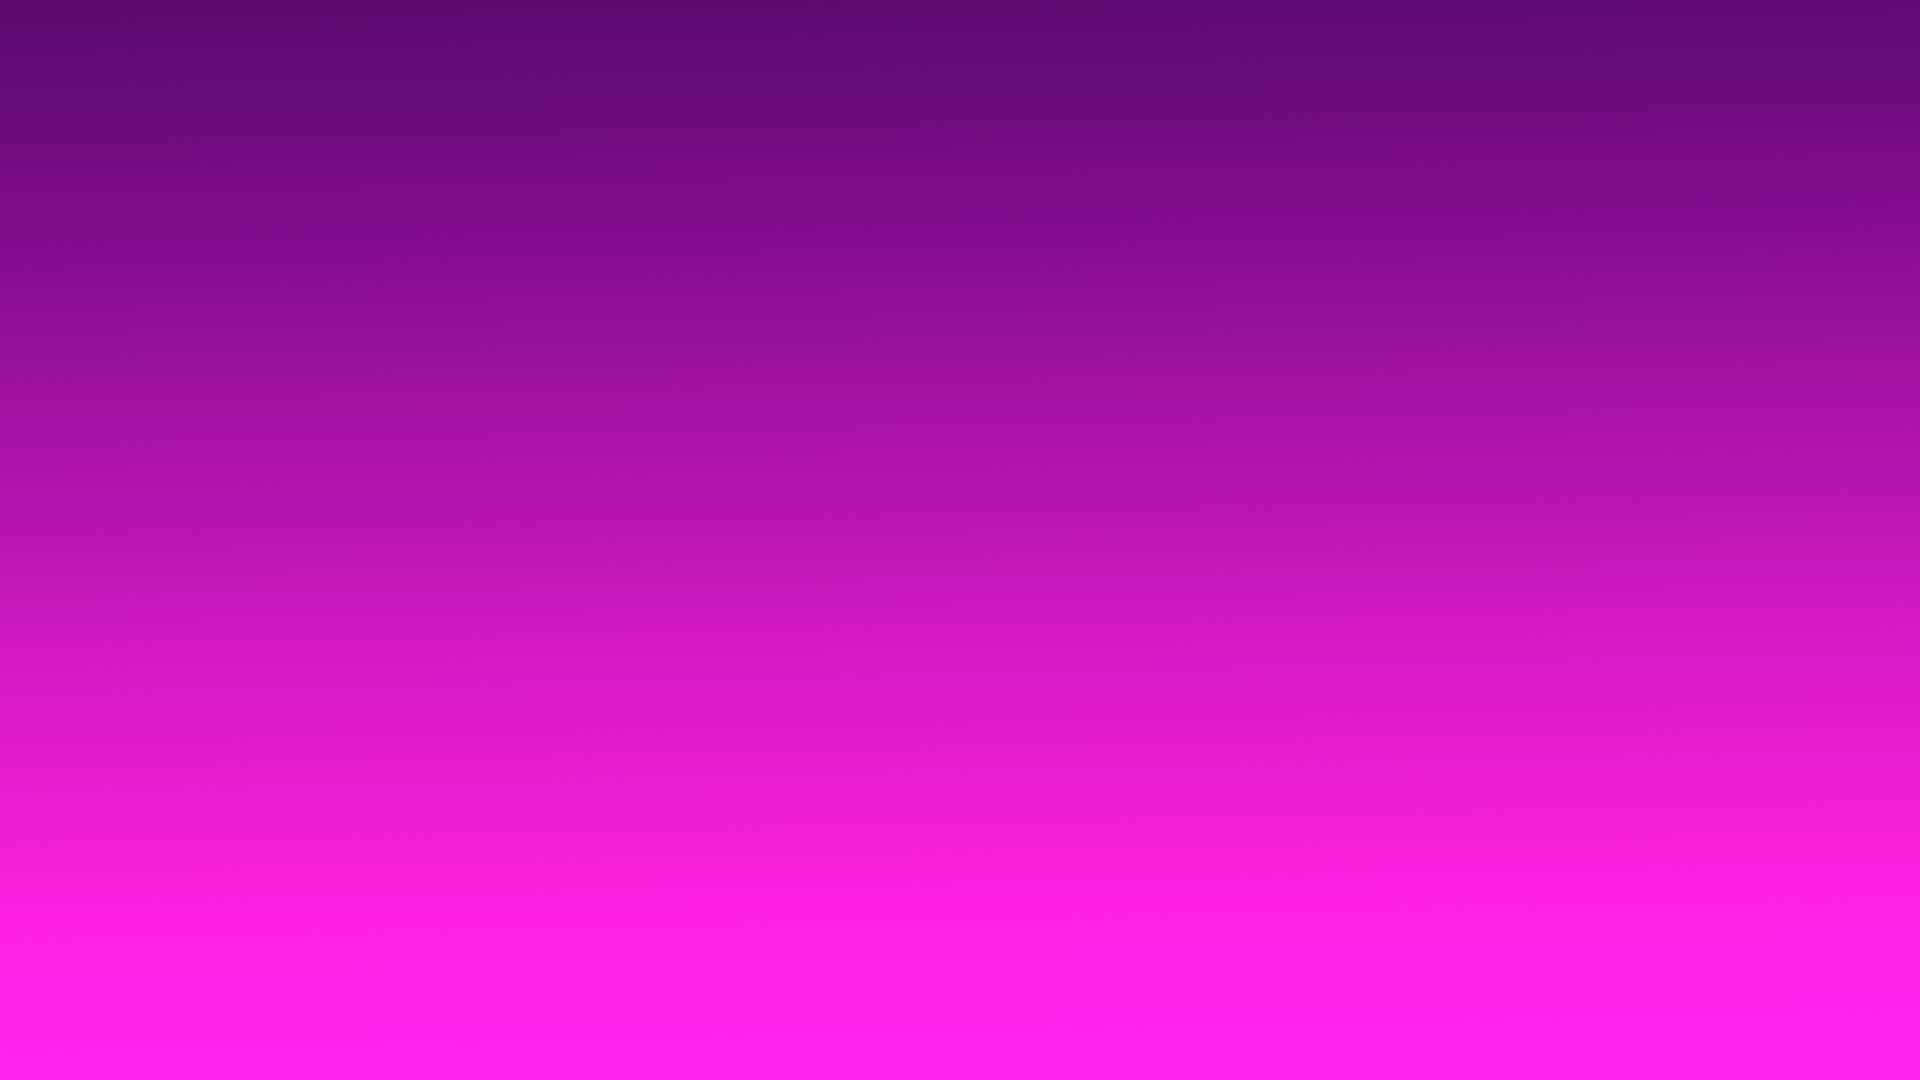 Radiant purple and pink background